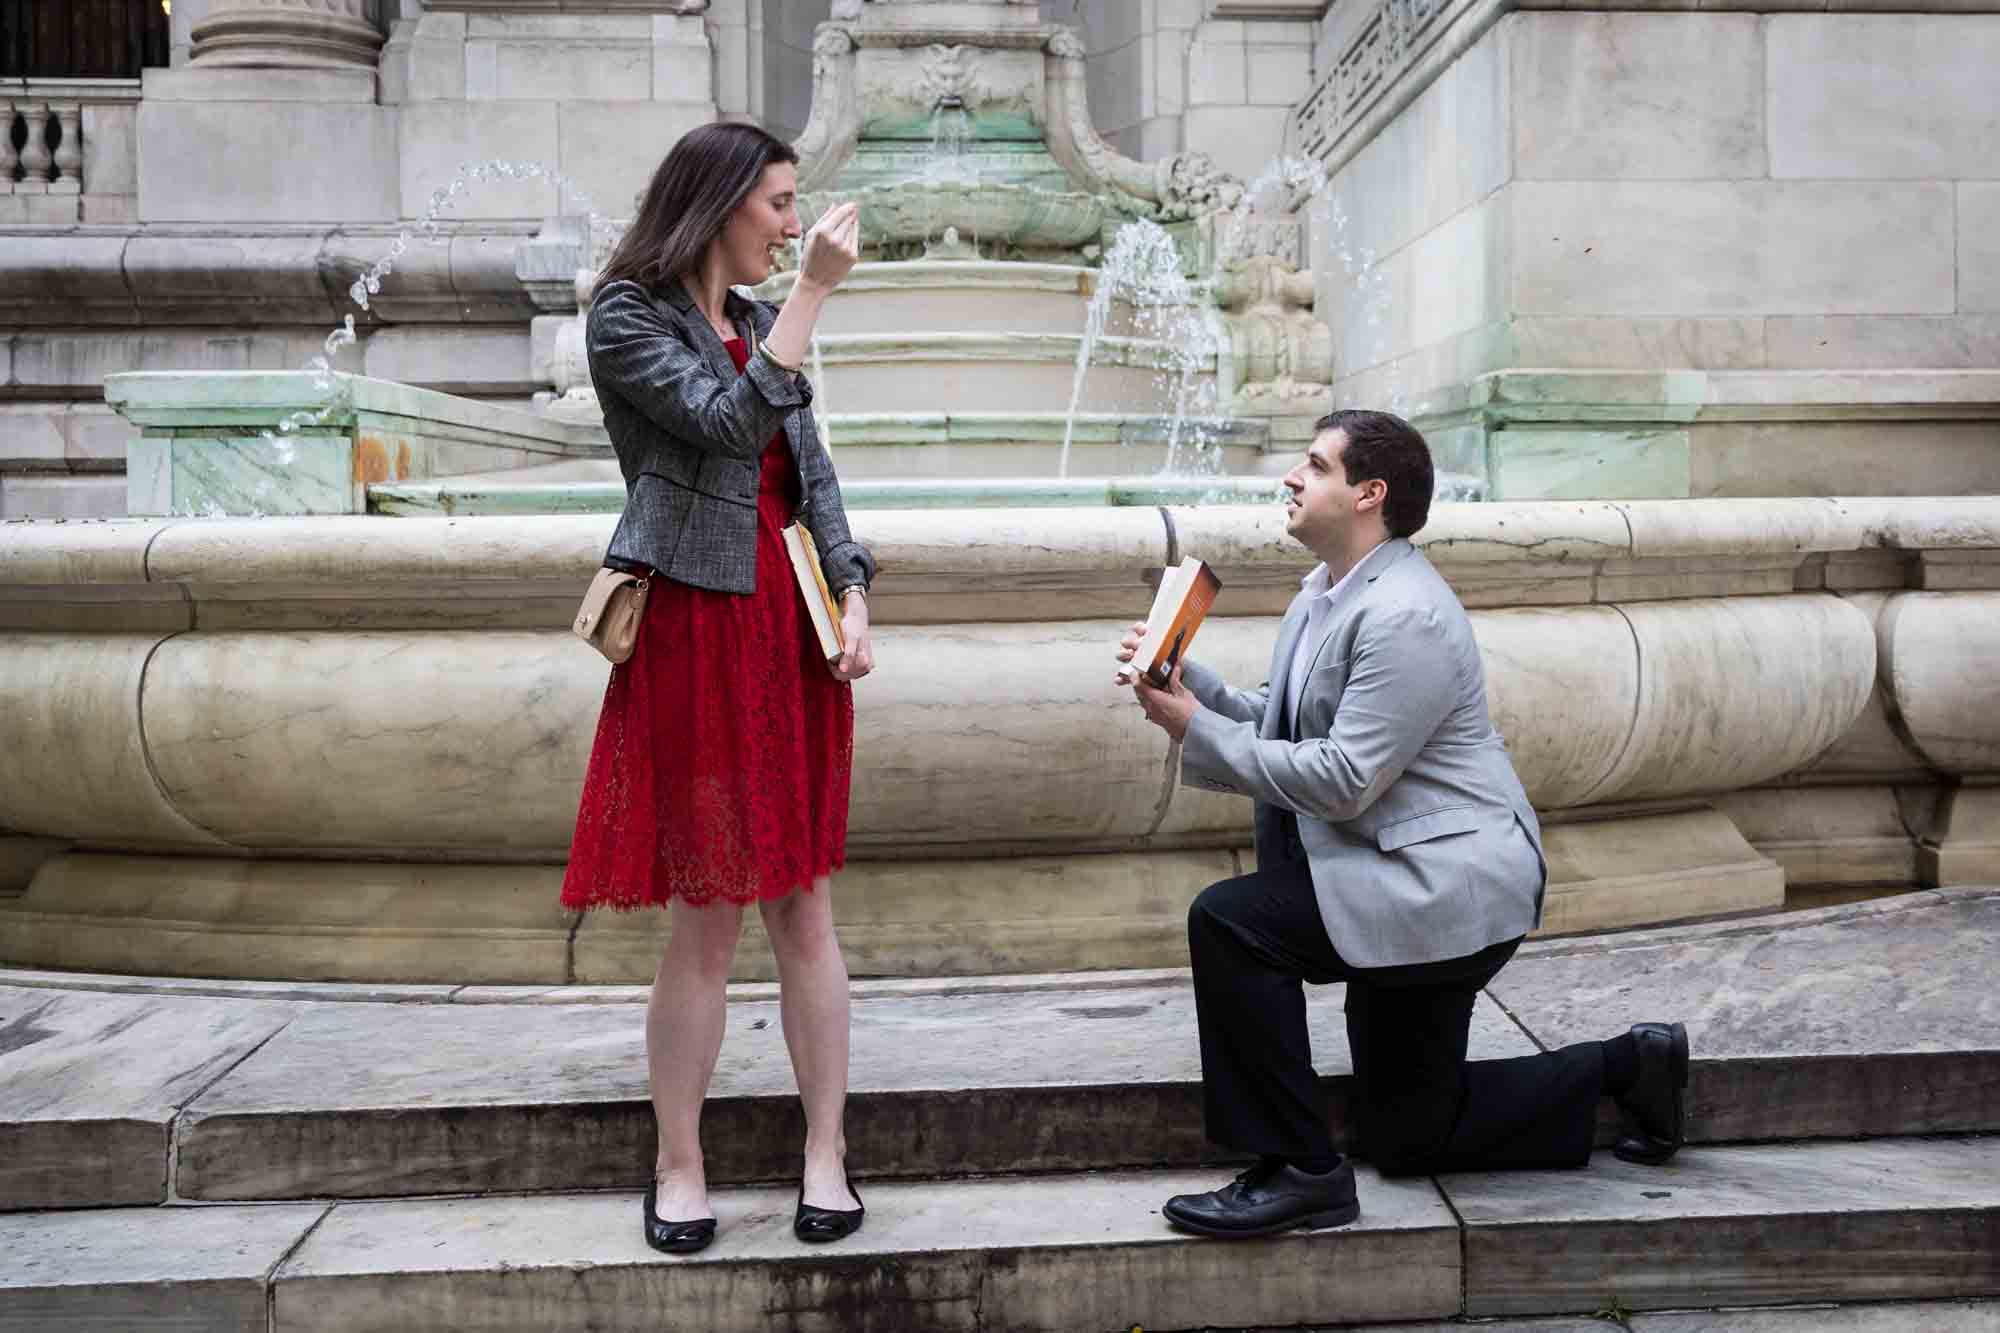 Woman in red dress about to cry in front of man wearing grey jacket on one knee holding book during New York Public Library proposal